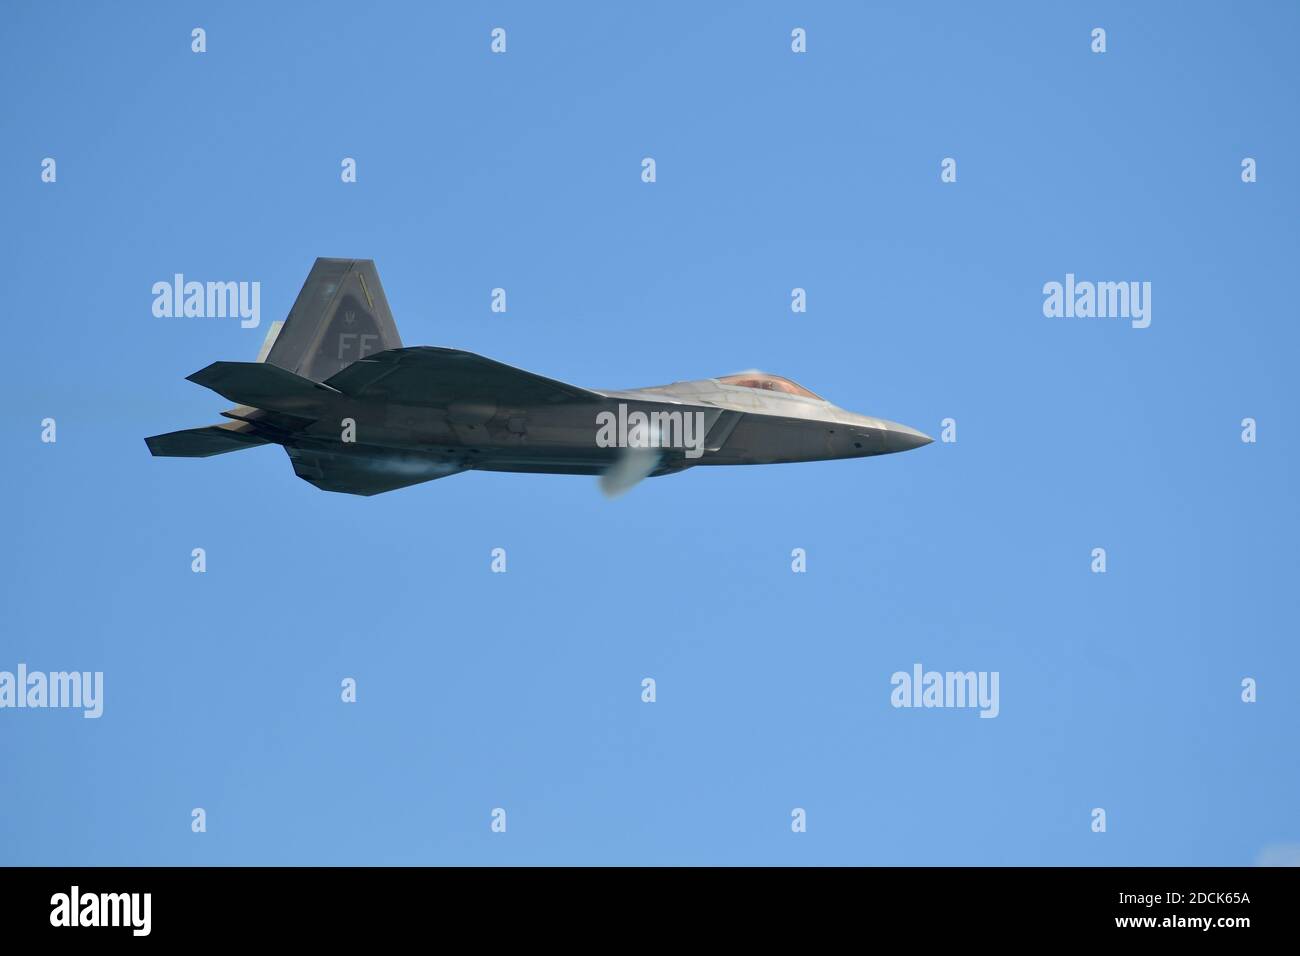 FORT LAUDERDALE, FL - NOVEMBER 21: F-22 Raptor Demo Team performs in the Fort Lauderdale Air Show on November 21, 2020 in Fort Lauderdale, Florida People: F-22 Raptor Demo Team Credit: Storms Media Group/Alamy Live News Stock Photo